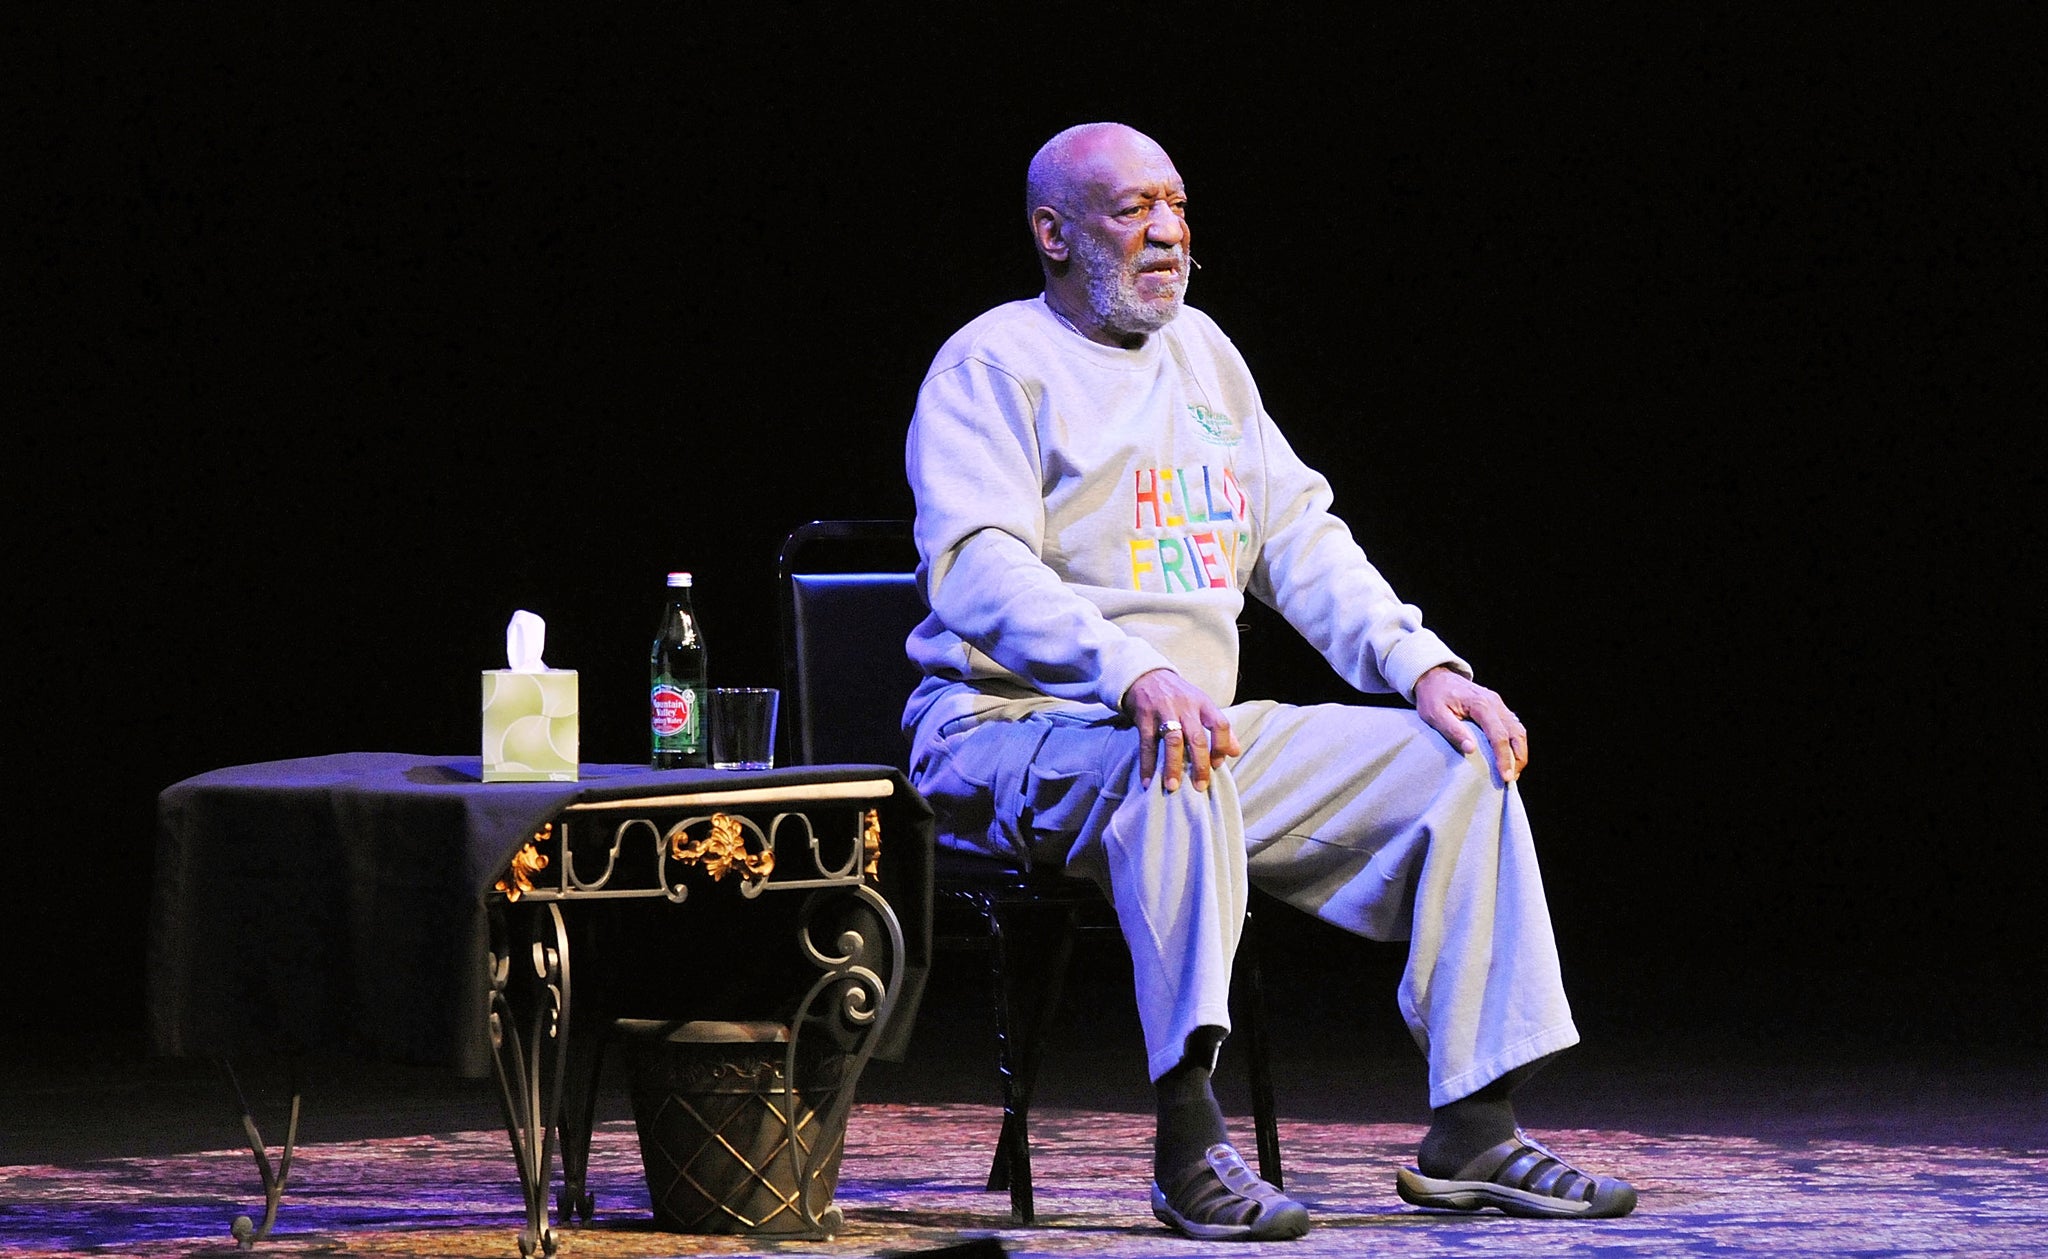 Bill Cosby made a controversial joke last night and acknowledged rape allegations